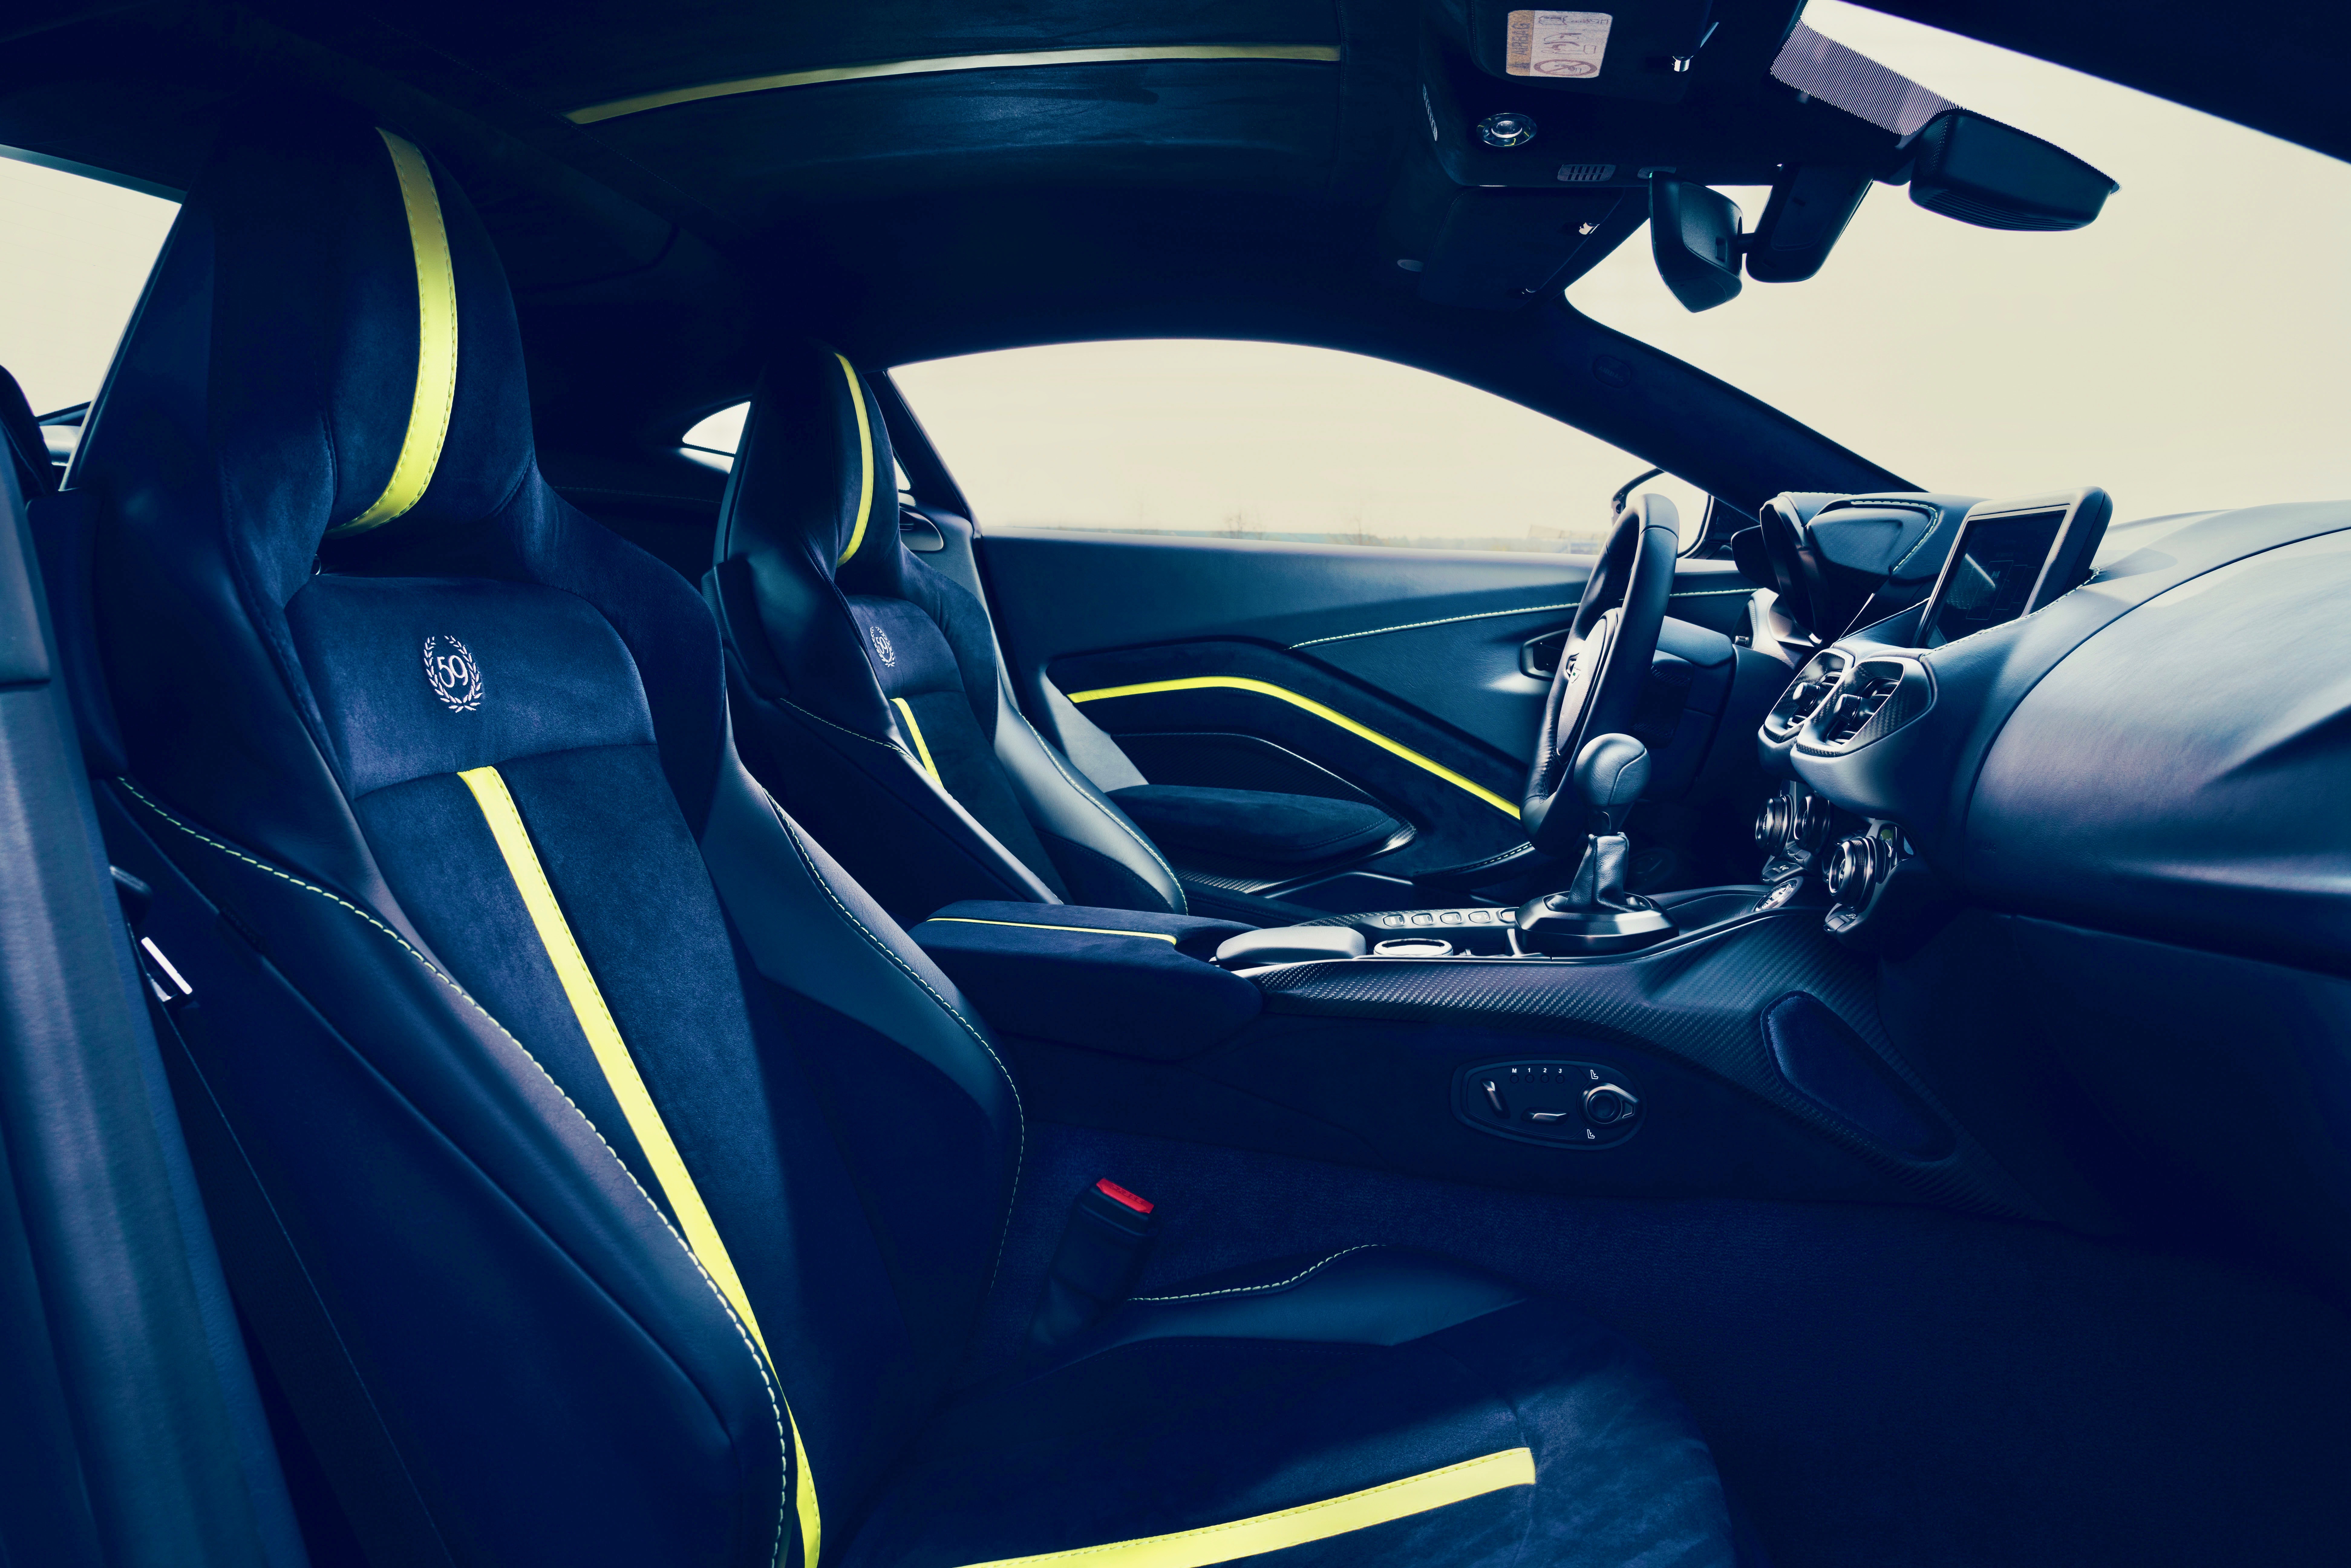 Aston Martin, Aston Martin offers third-pedal for new Vantage AMR, ClassicCars.com Journal